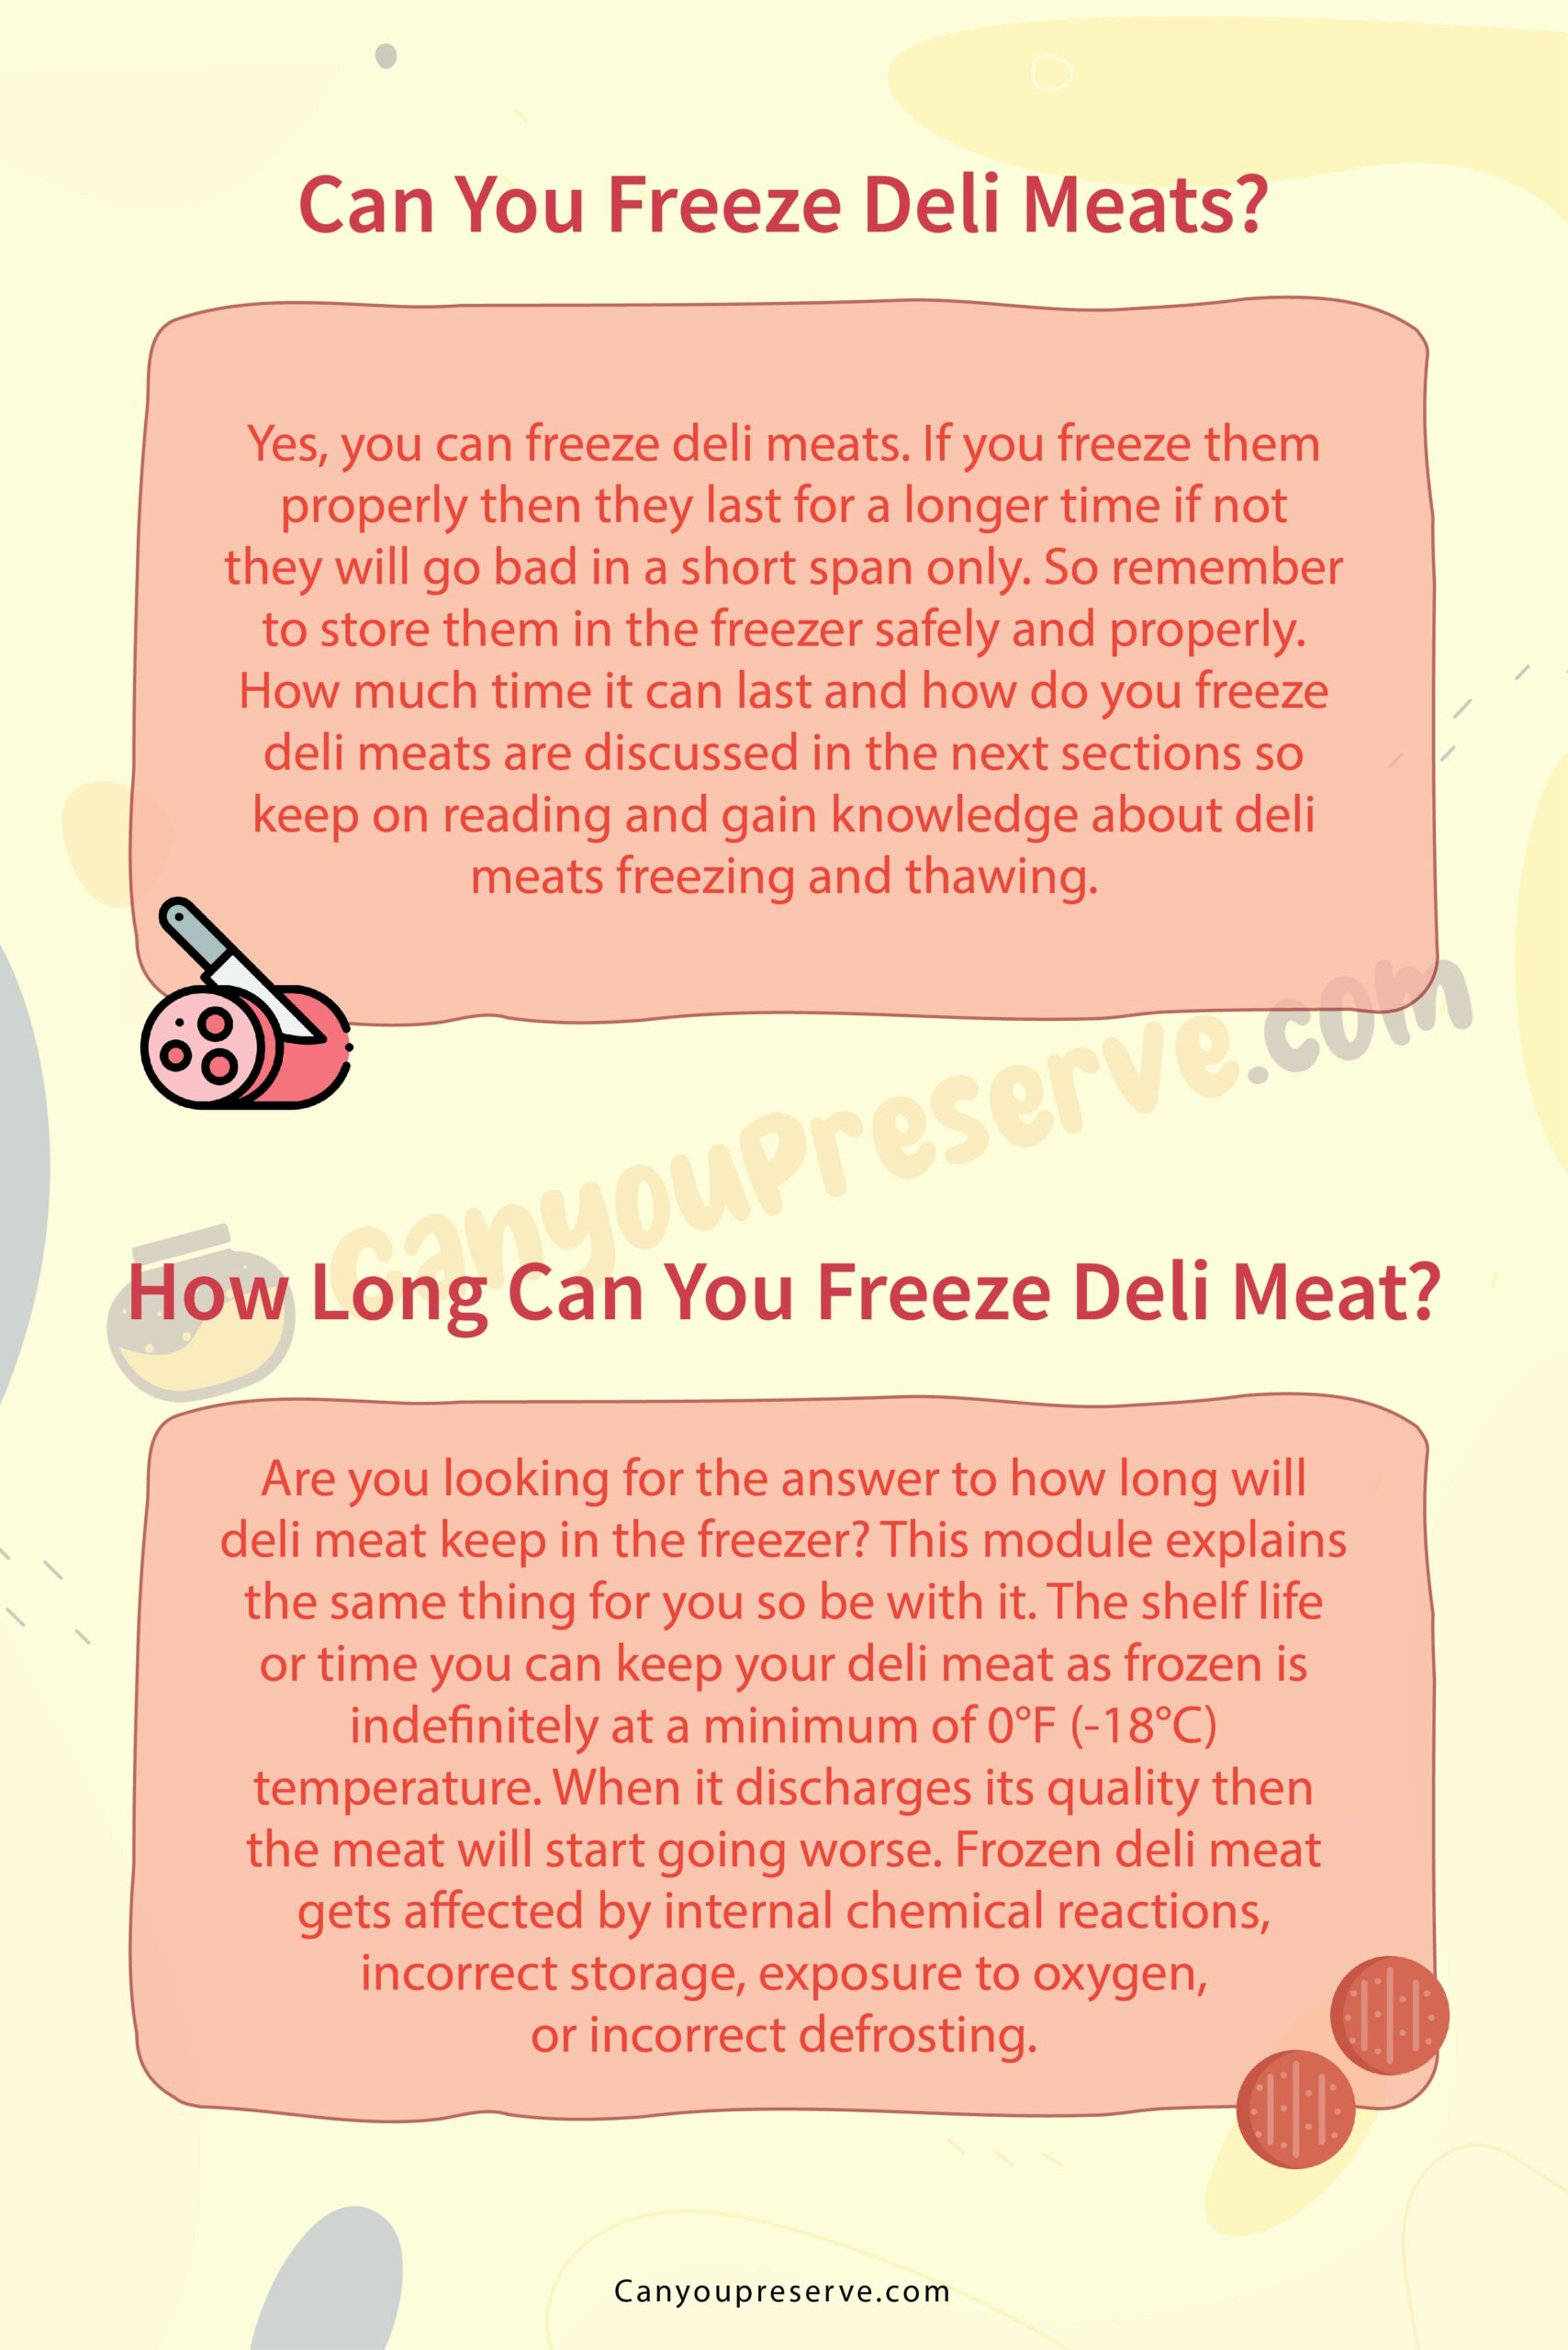 You Can Freeze Deli Meats